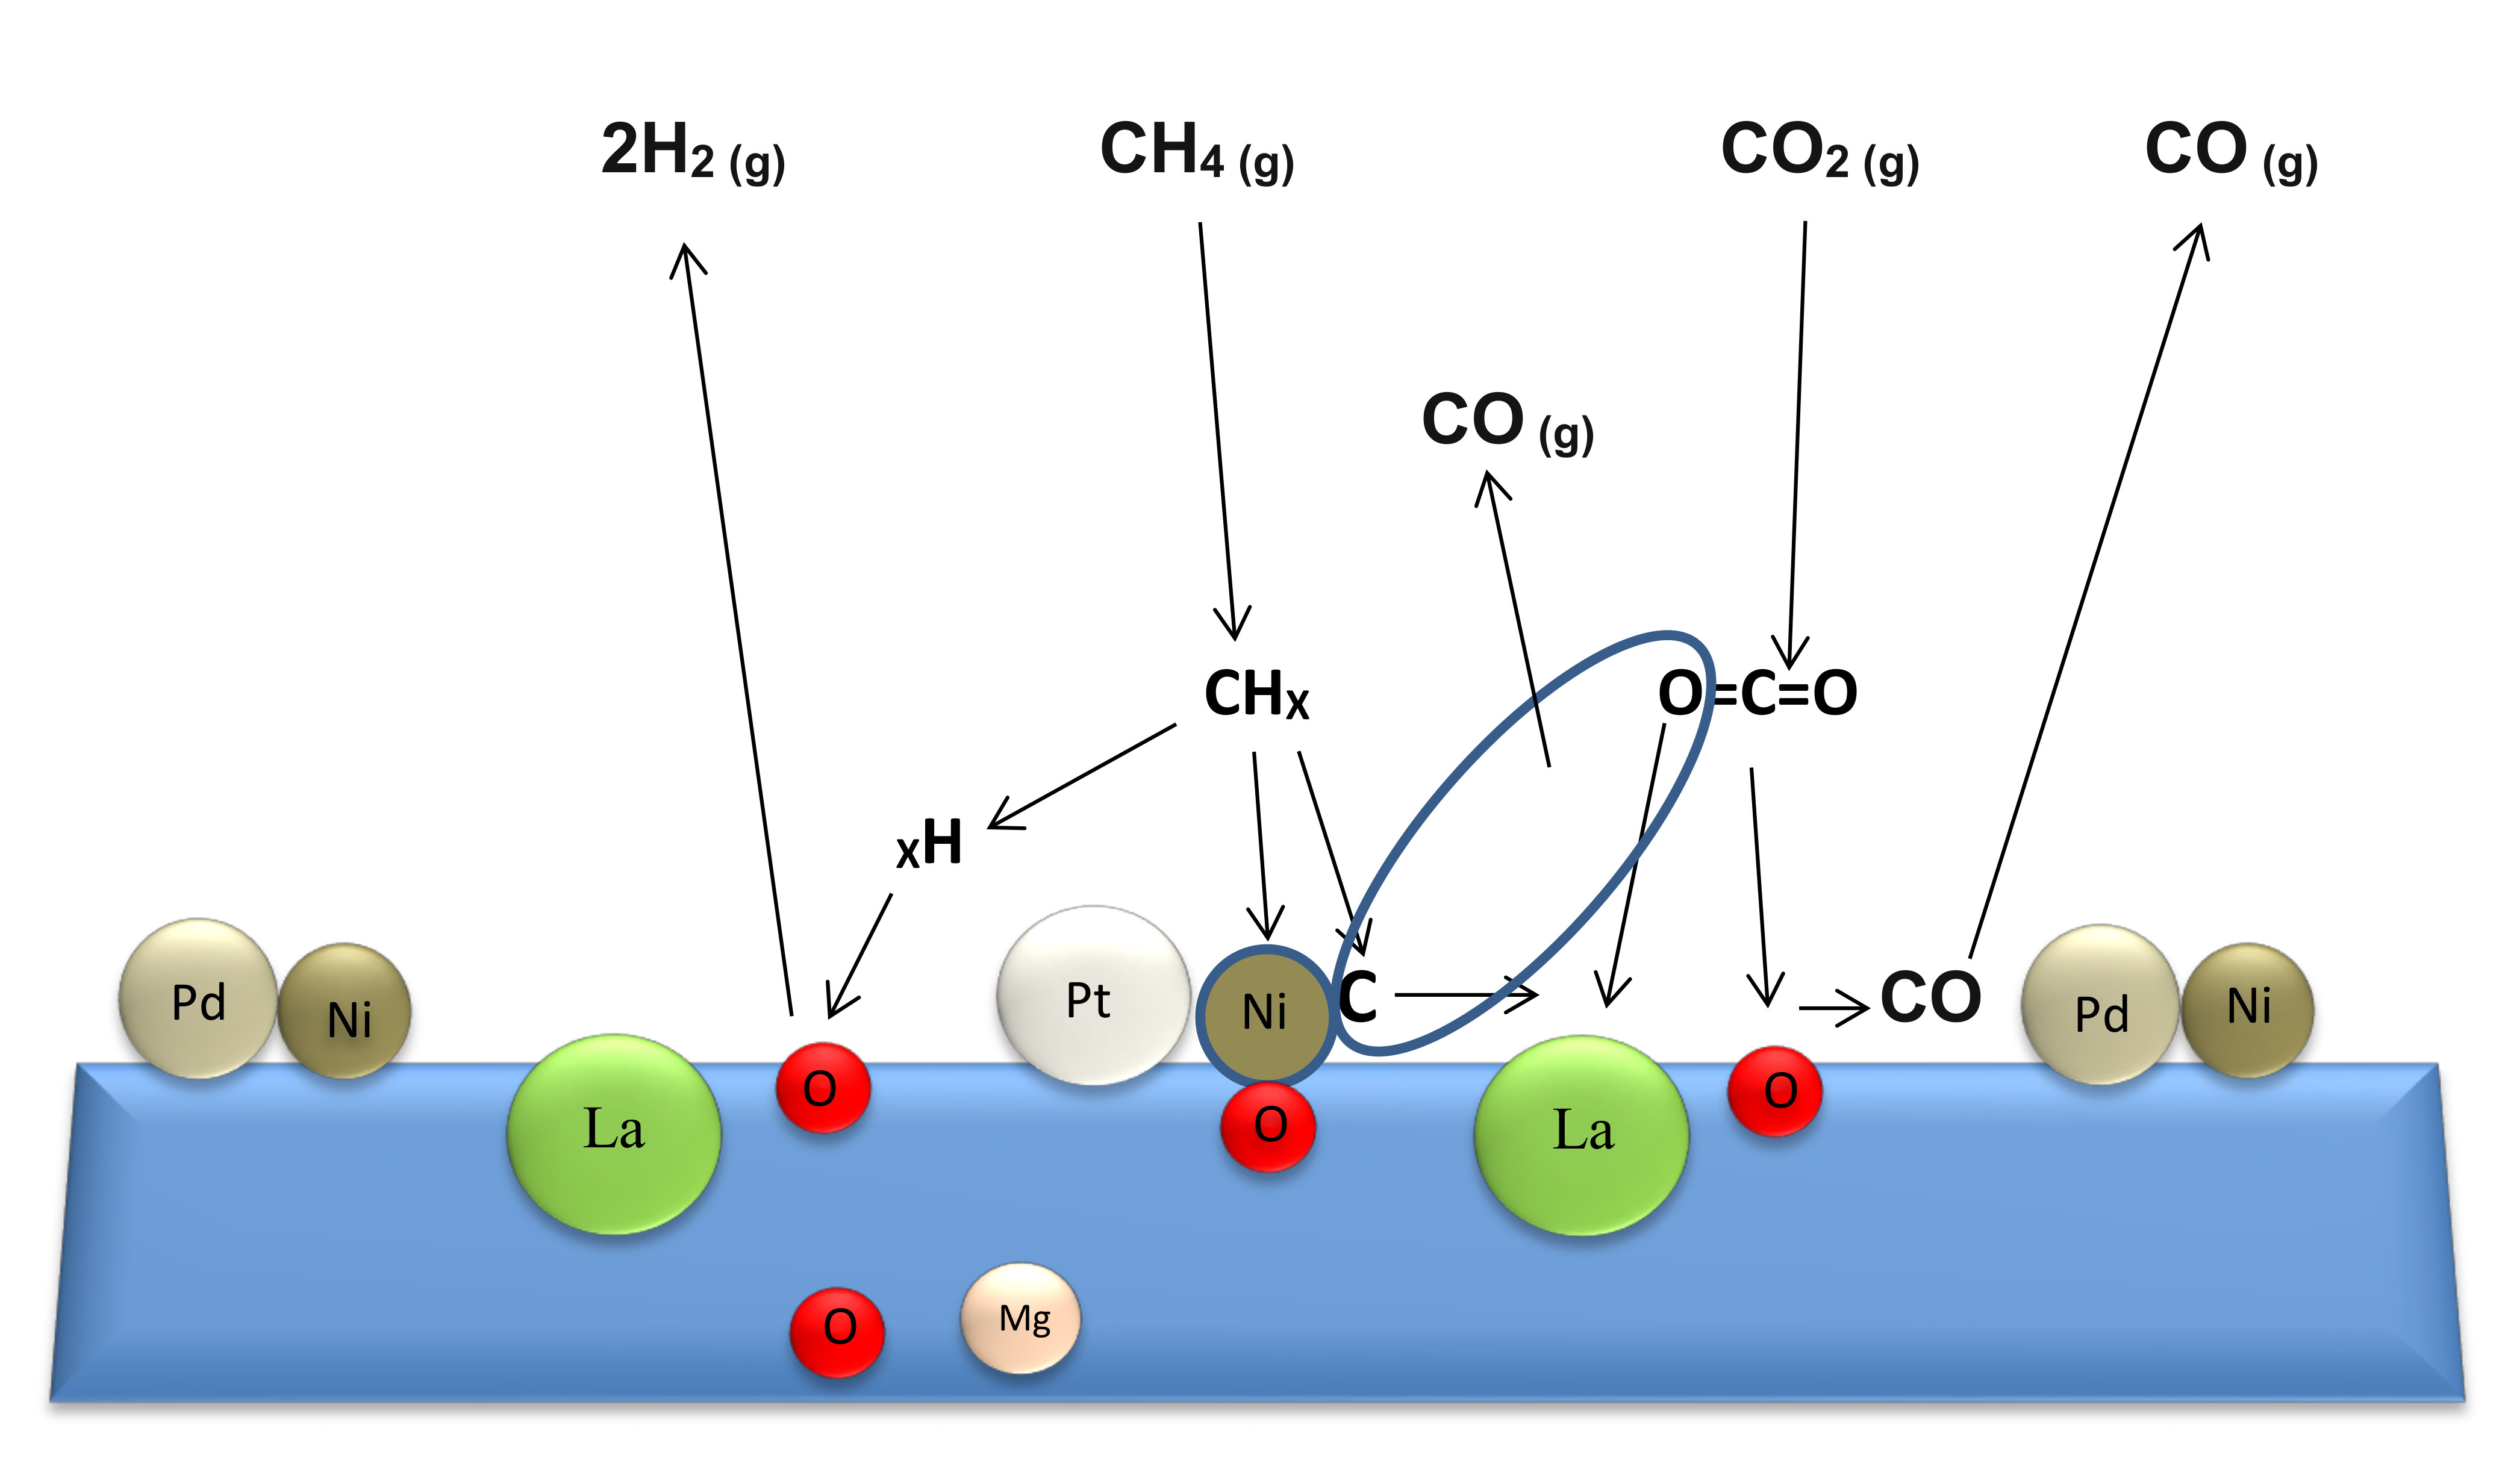 Full article: Reforming of methane: Effects of active metals, supports, and  promoters